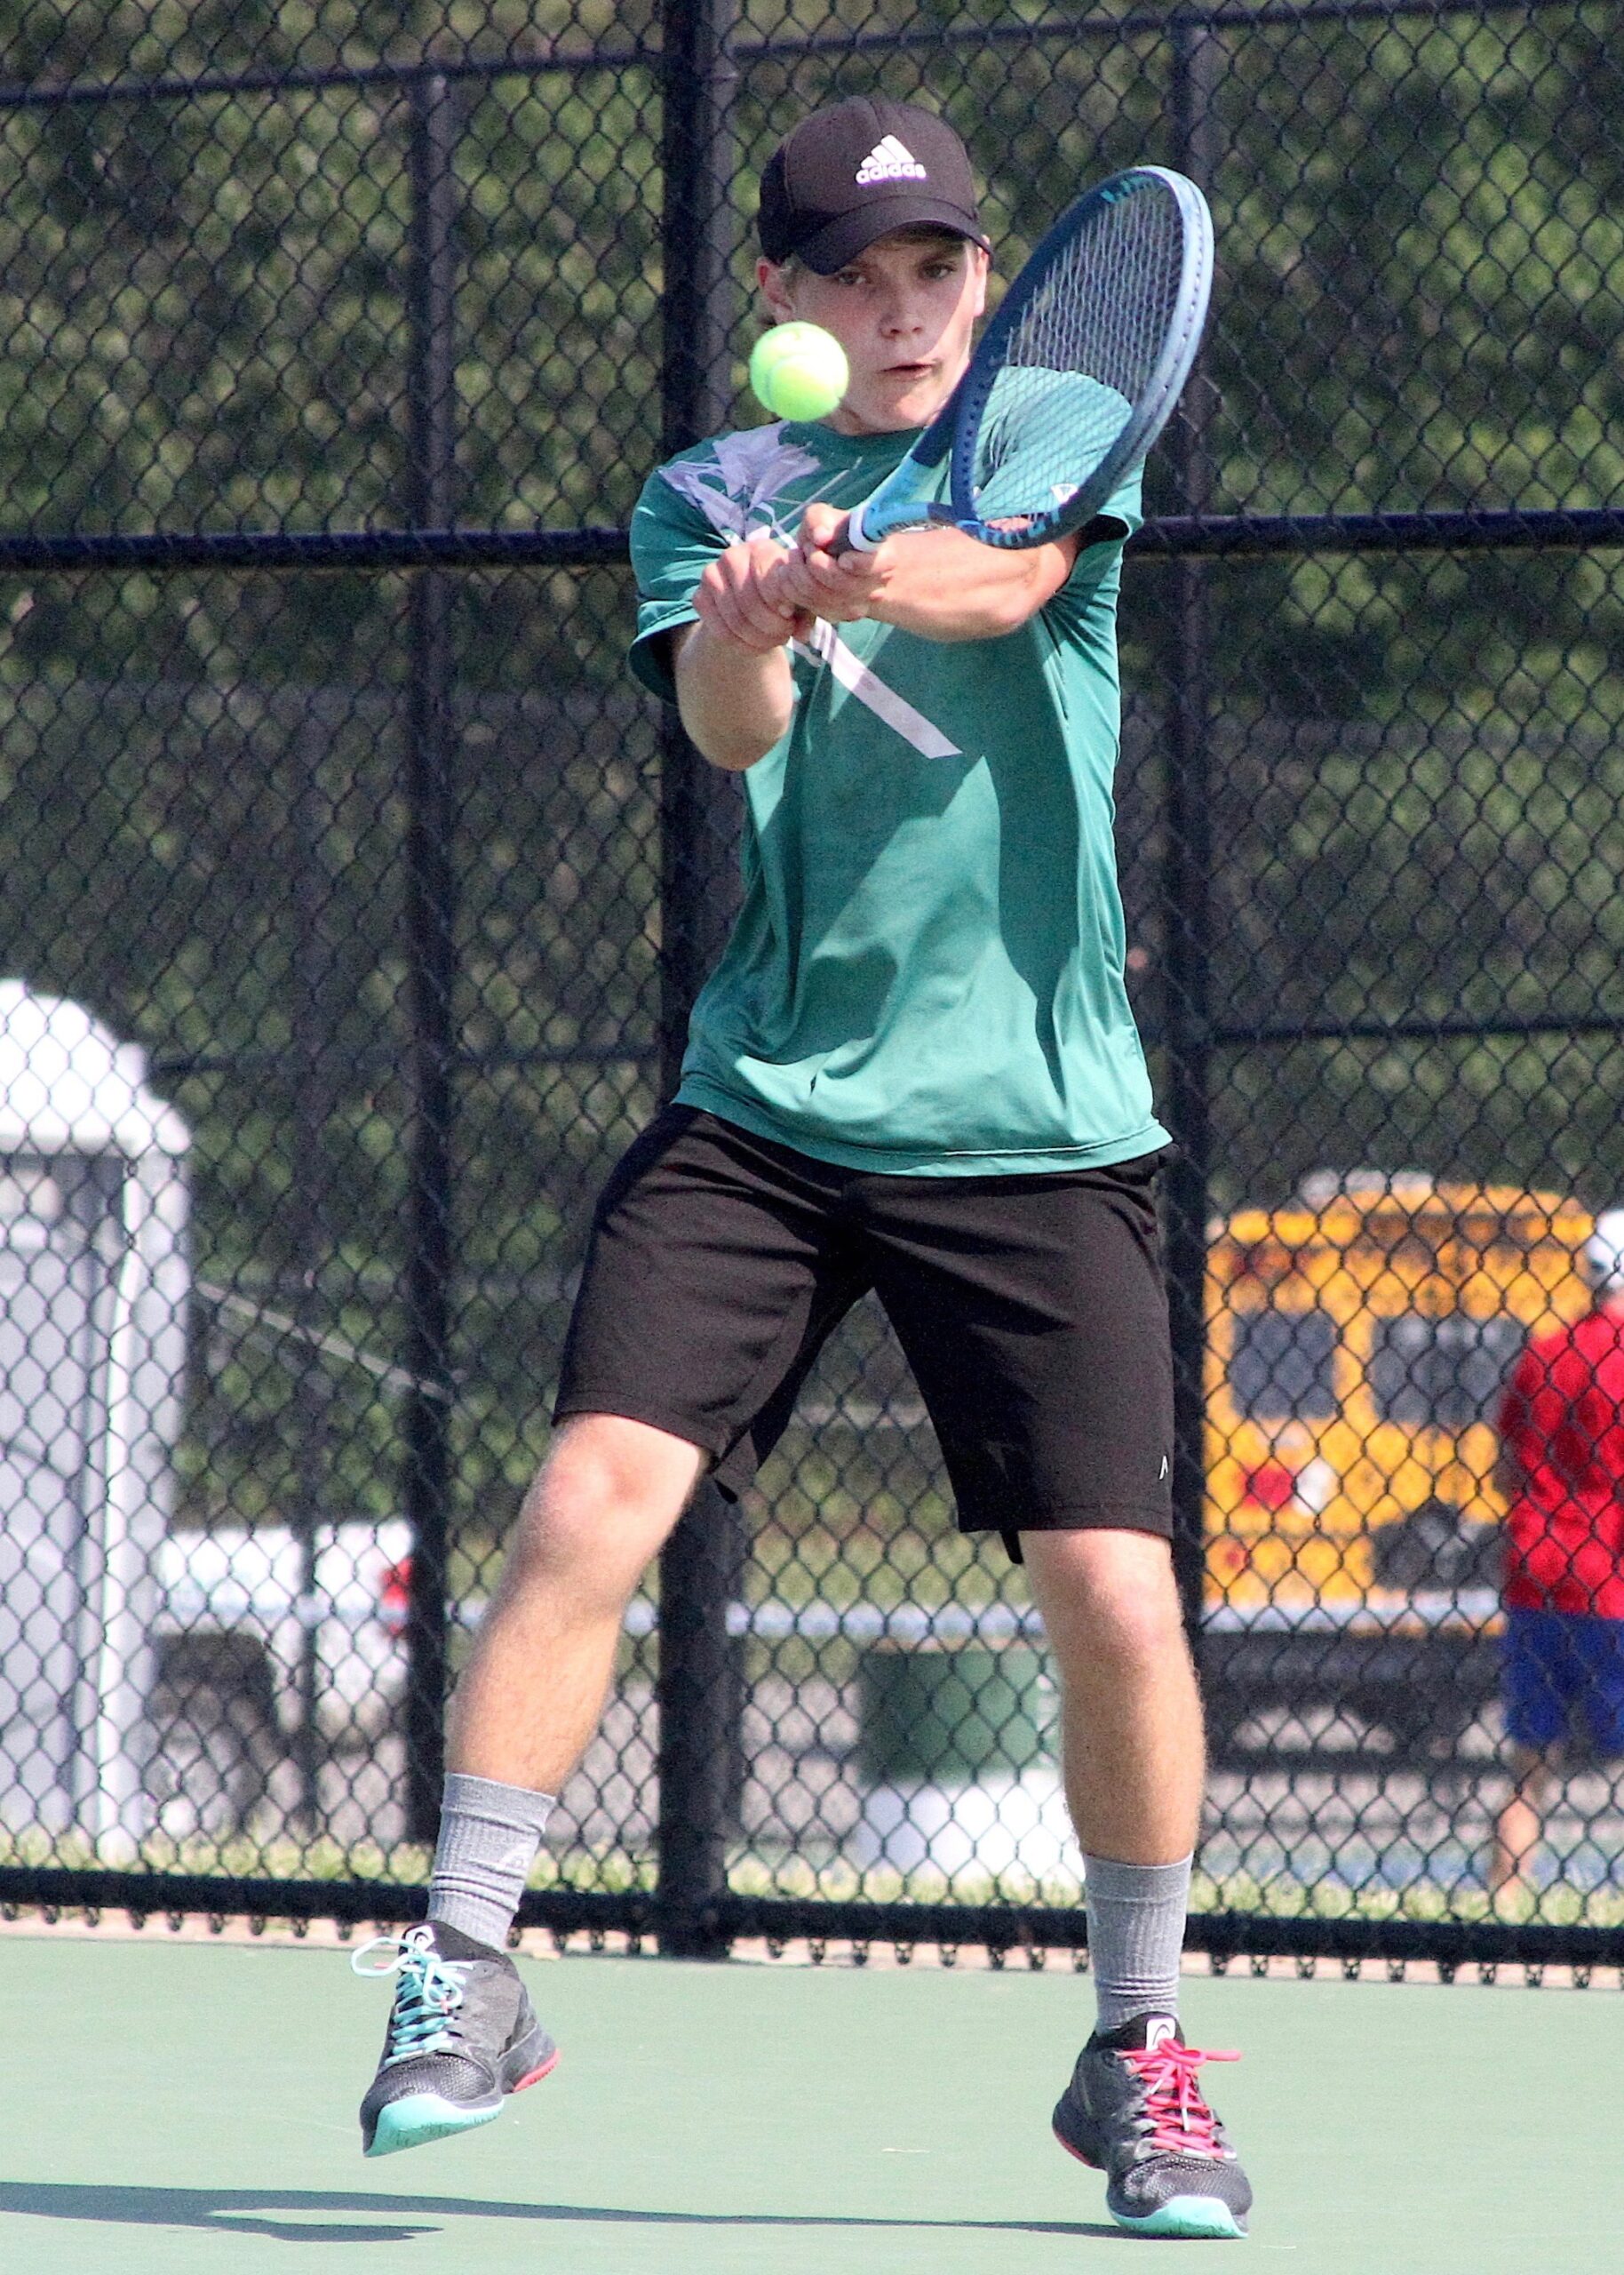 Gavin Vander Schaaf has played at first singles for the Hurricanes and been named captain the past two seasons. DESIRÉE KEEGAN